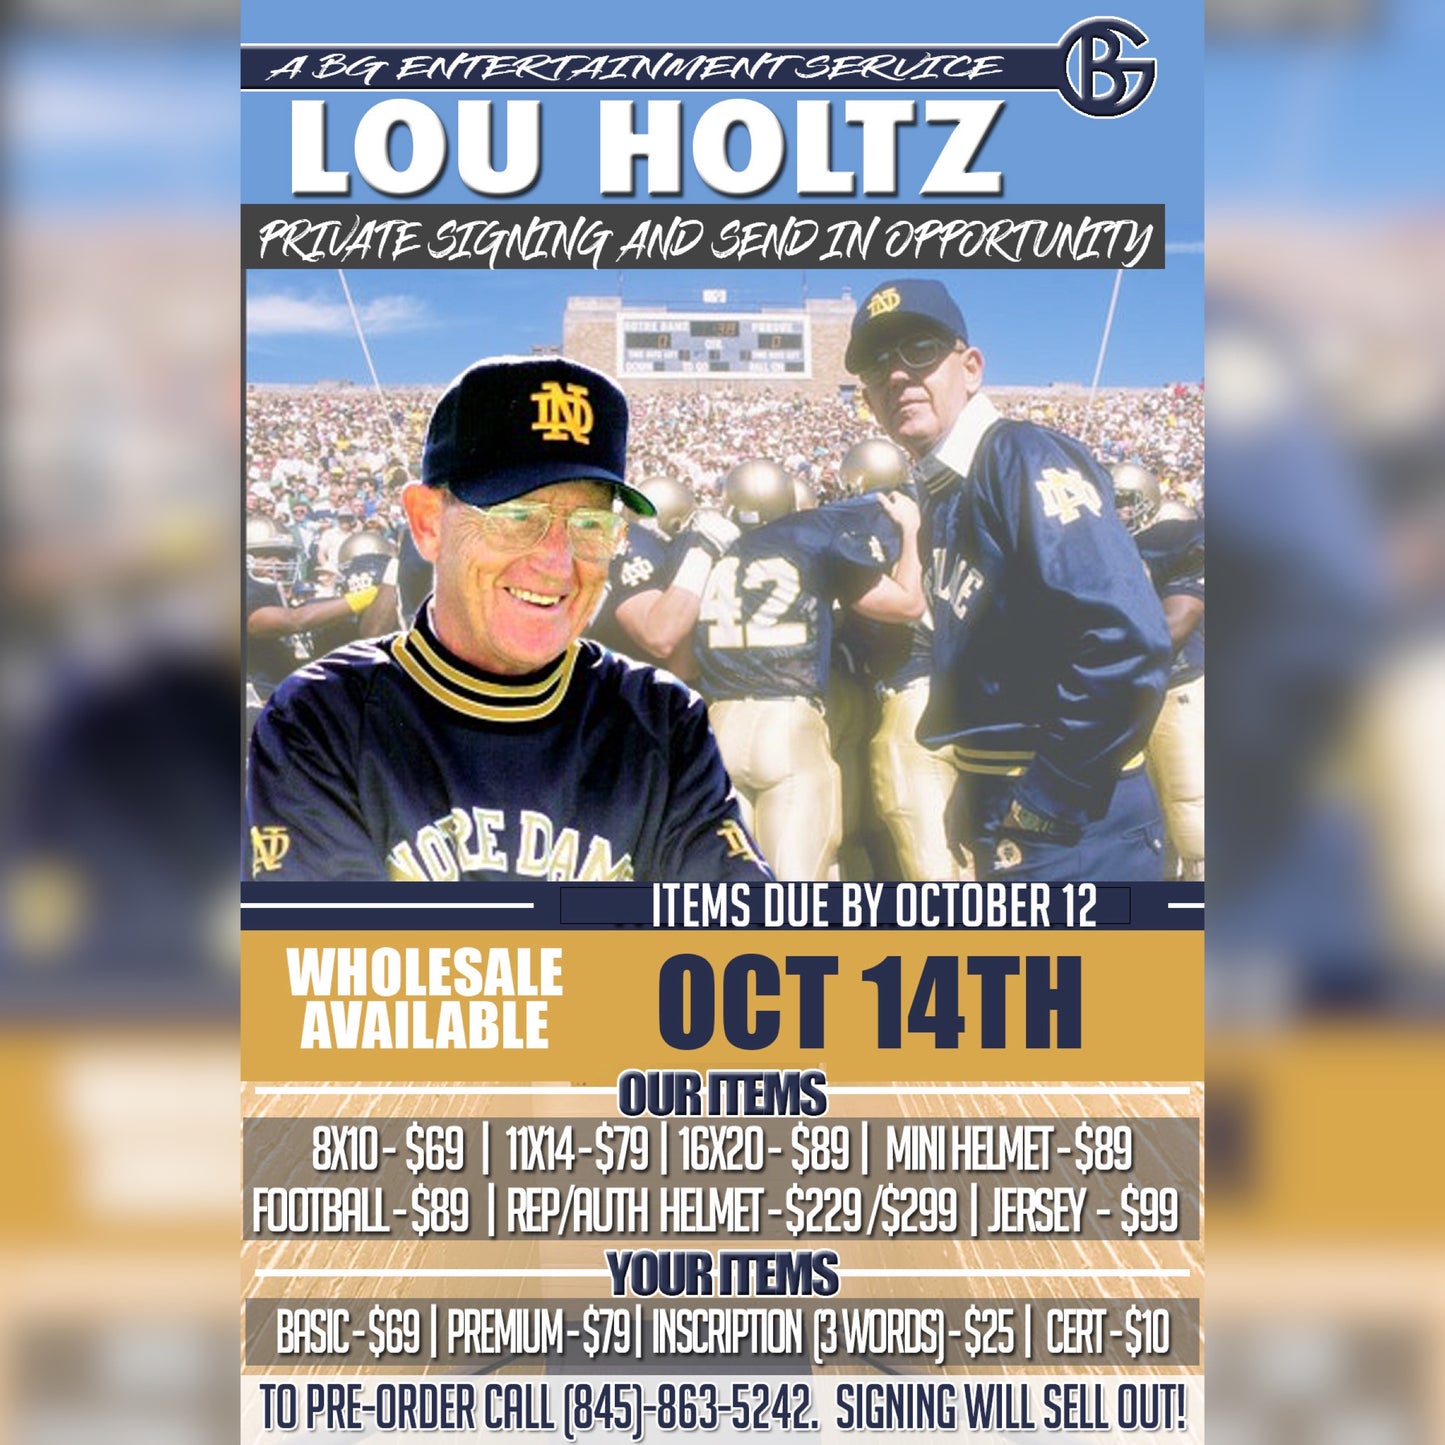 Lou Holtz Private Autograph Signing - October 14th